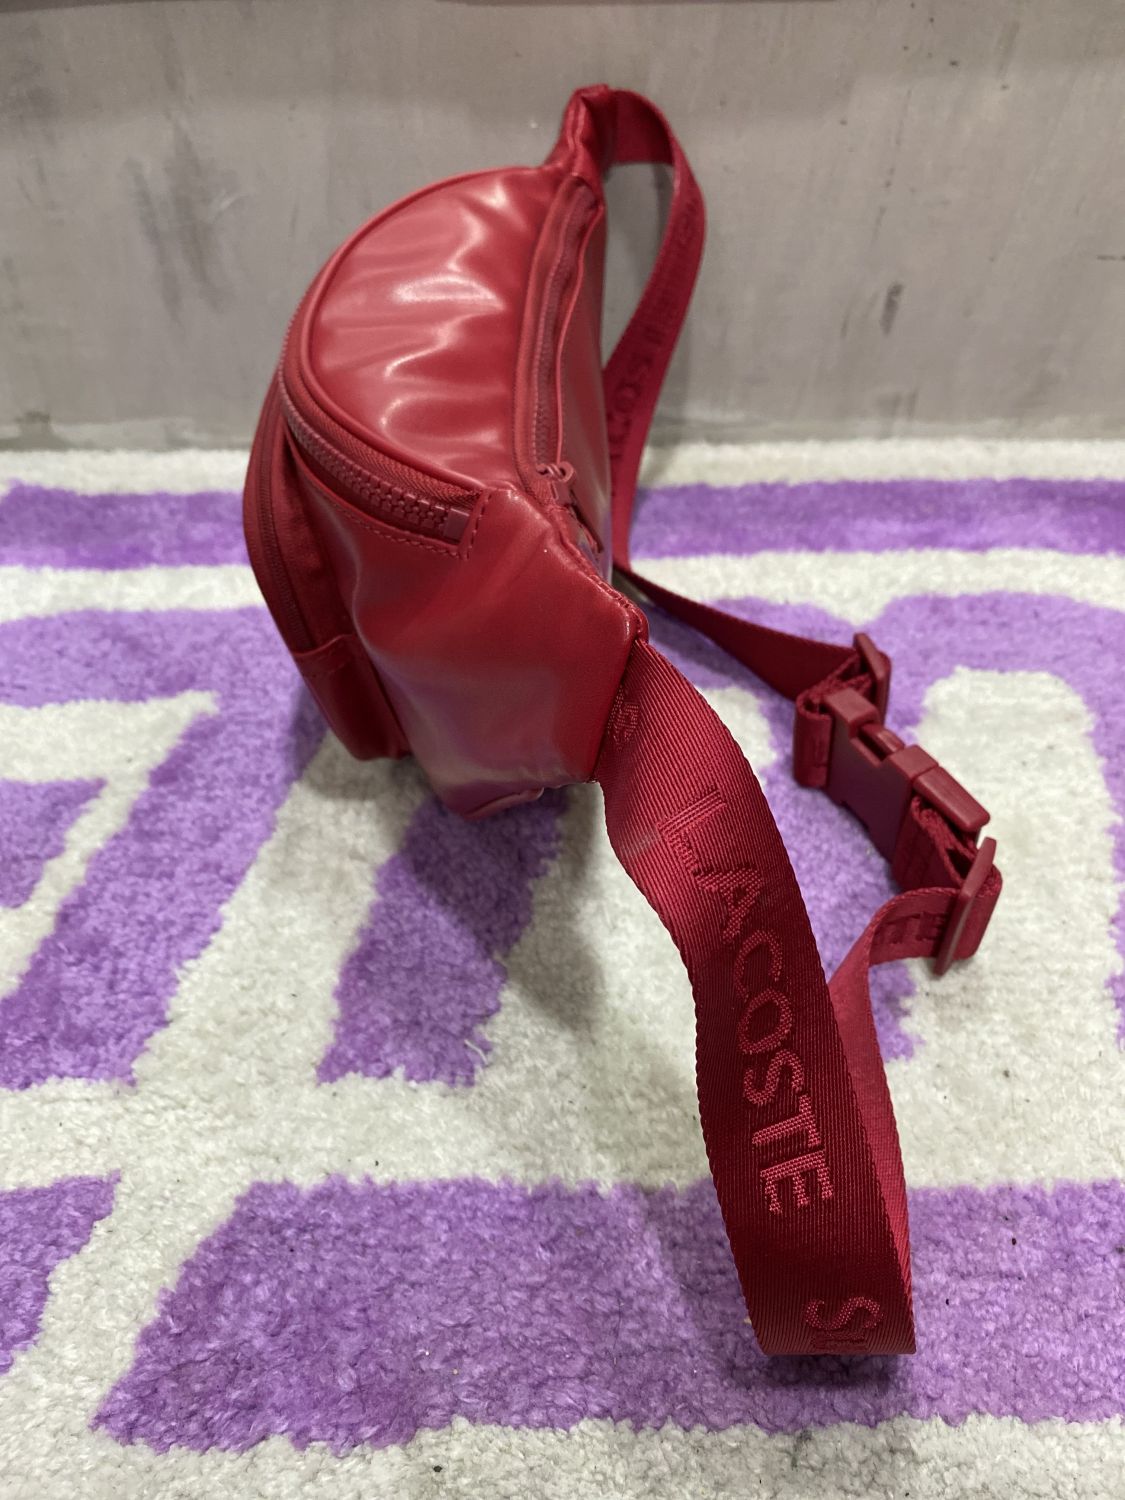 Supreme x Lacoste waist bag red